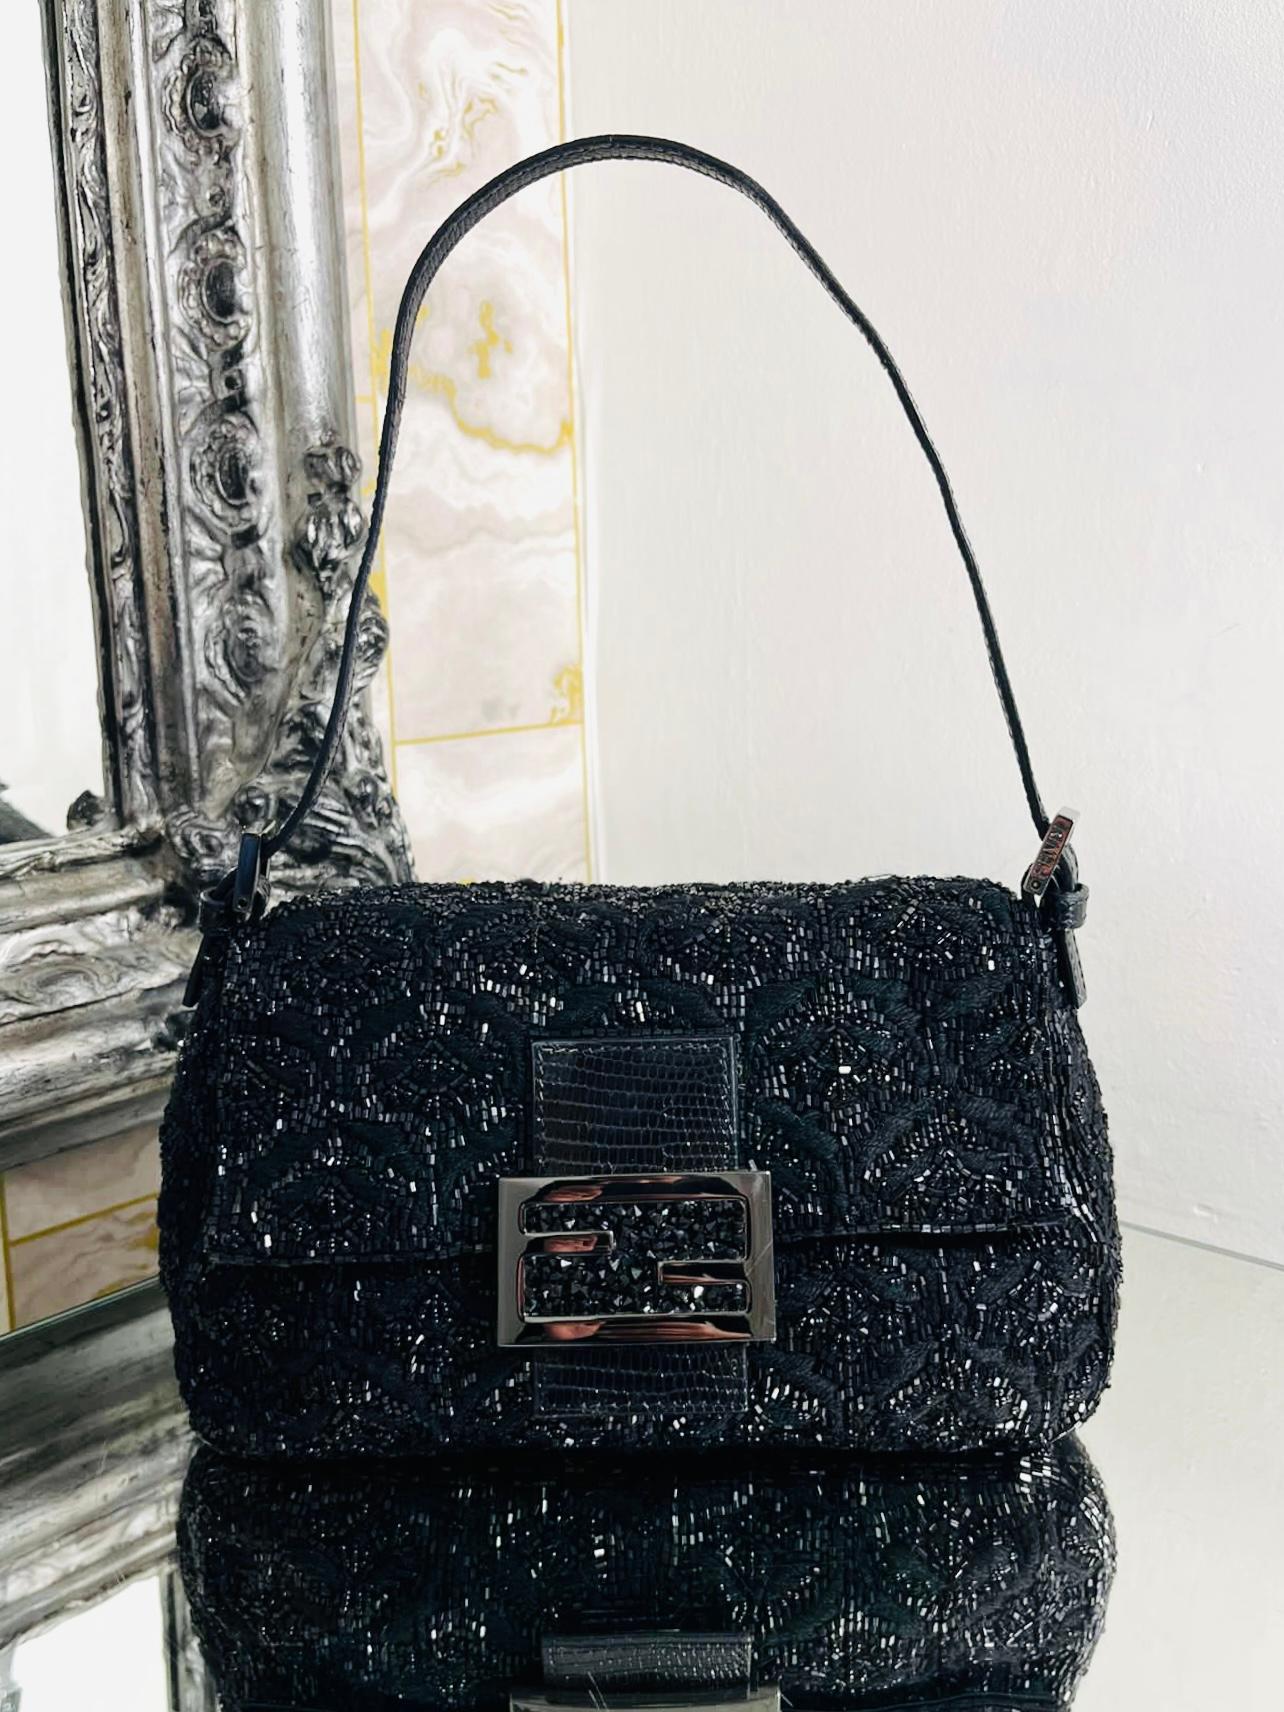 Fendi Beaded Mama Baguette Bag

Black bag which is fully adorned in fancy black beading pattern.

Black lizard embossed closure with large FF logo. Shoulder stap 

and silver hardware.

Size - Height 16cm, Width 21cm, Depth 10cm

Condition - Vintage